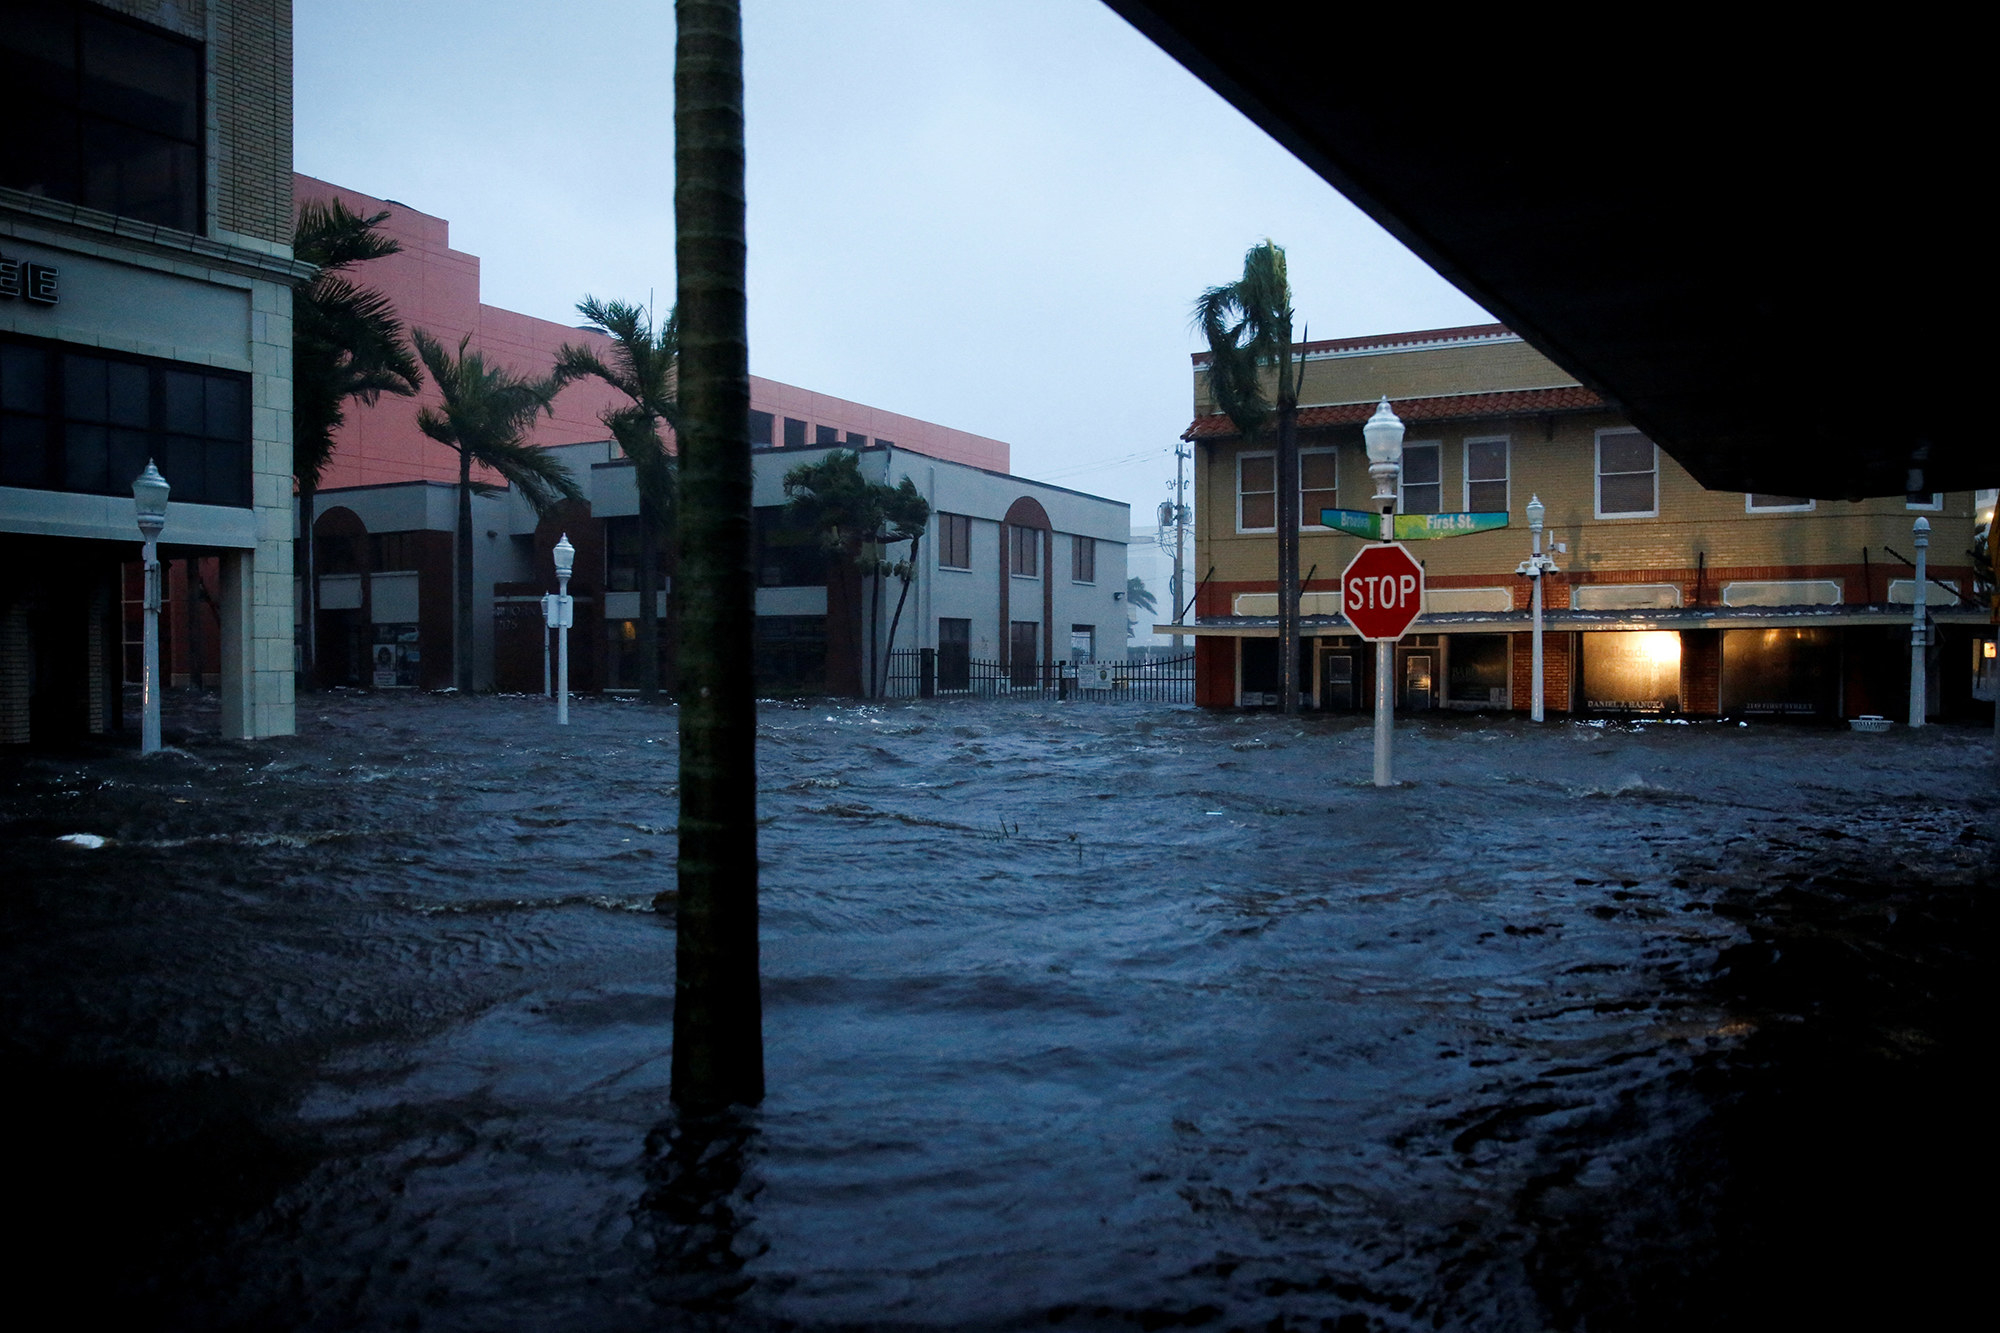 Water submerges a street, reaching at least half the height of buildings&#x27; first floors